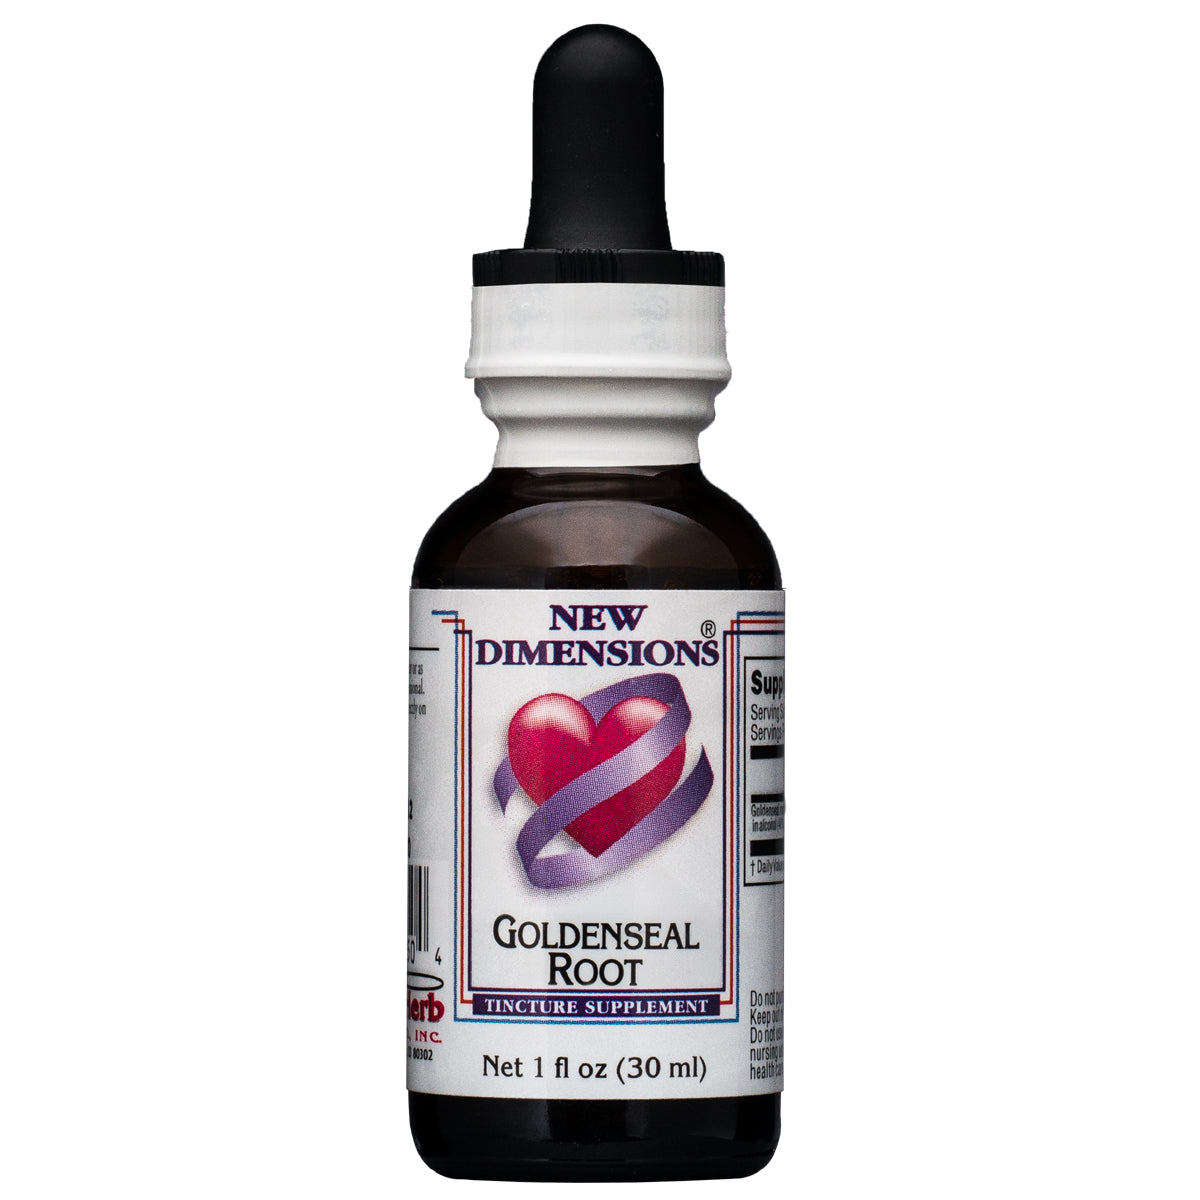 Goldenseal Root Tincture, New Dimensions®